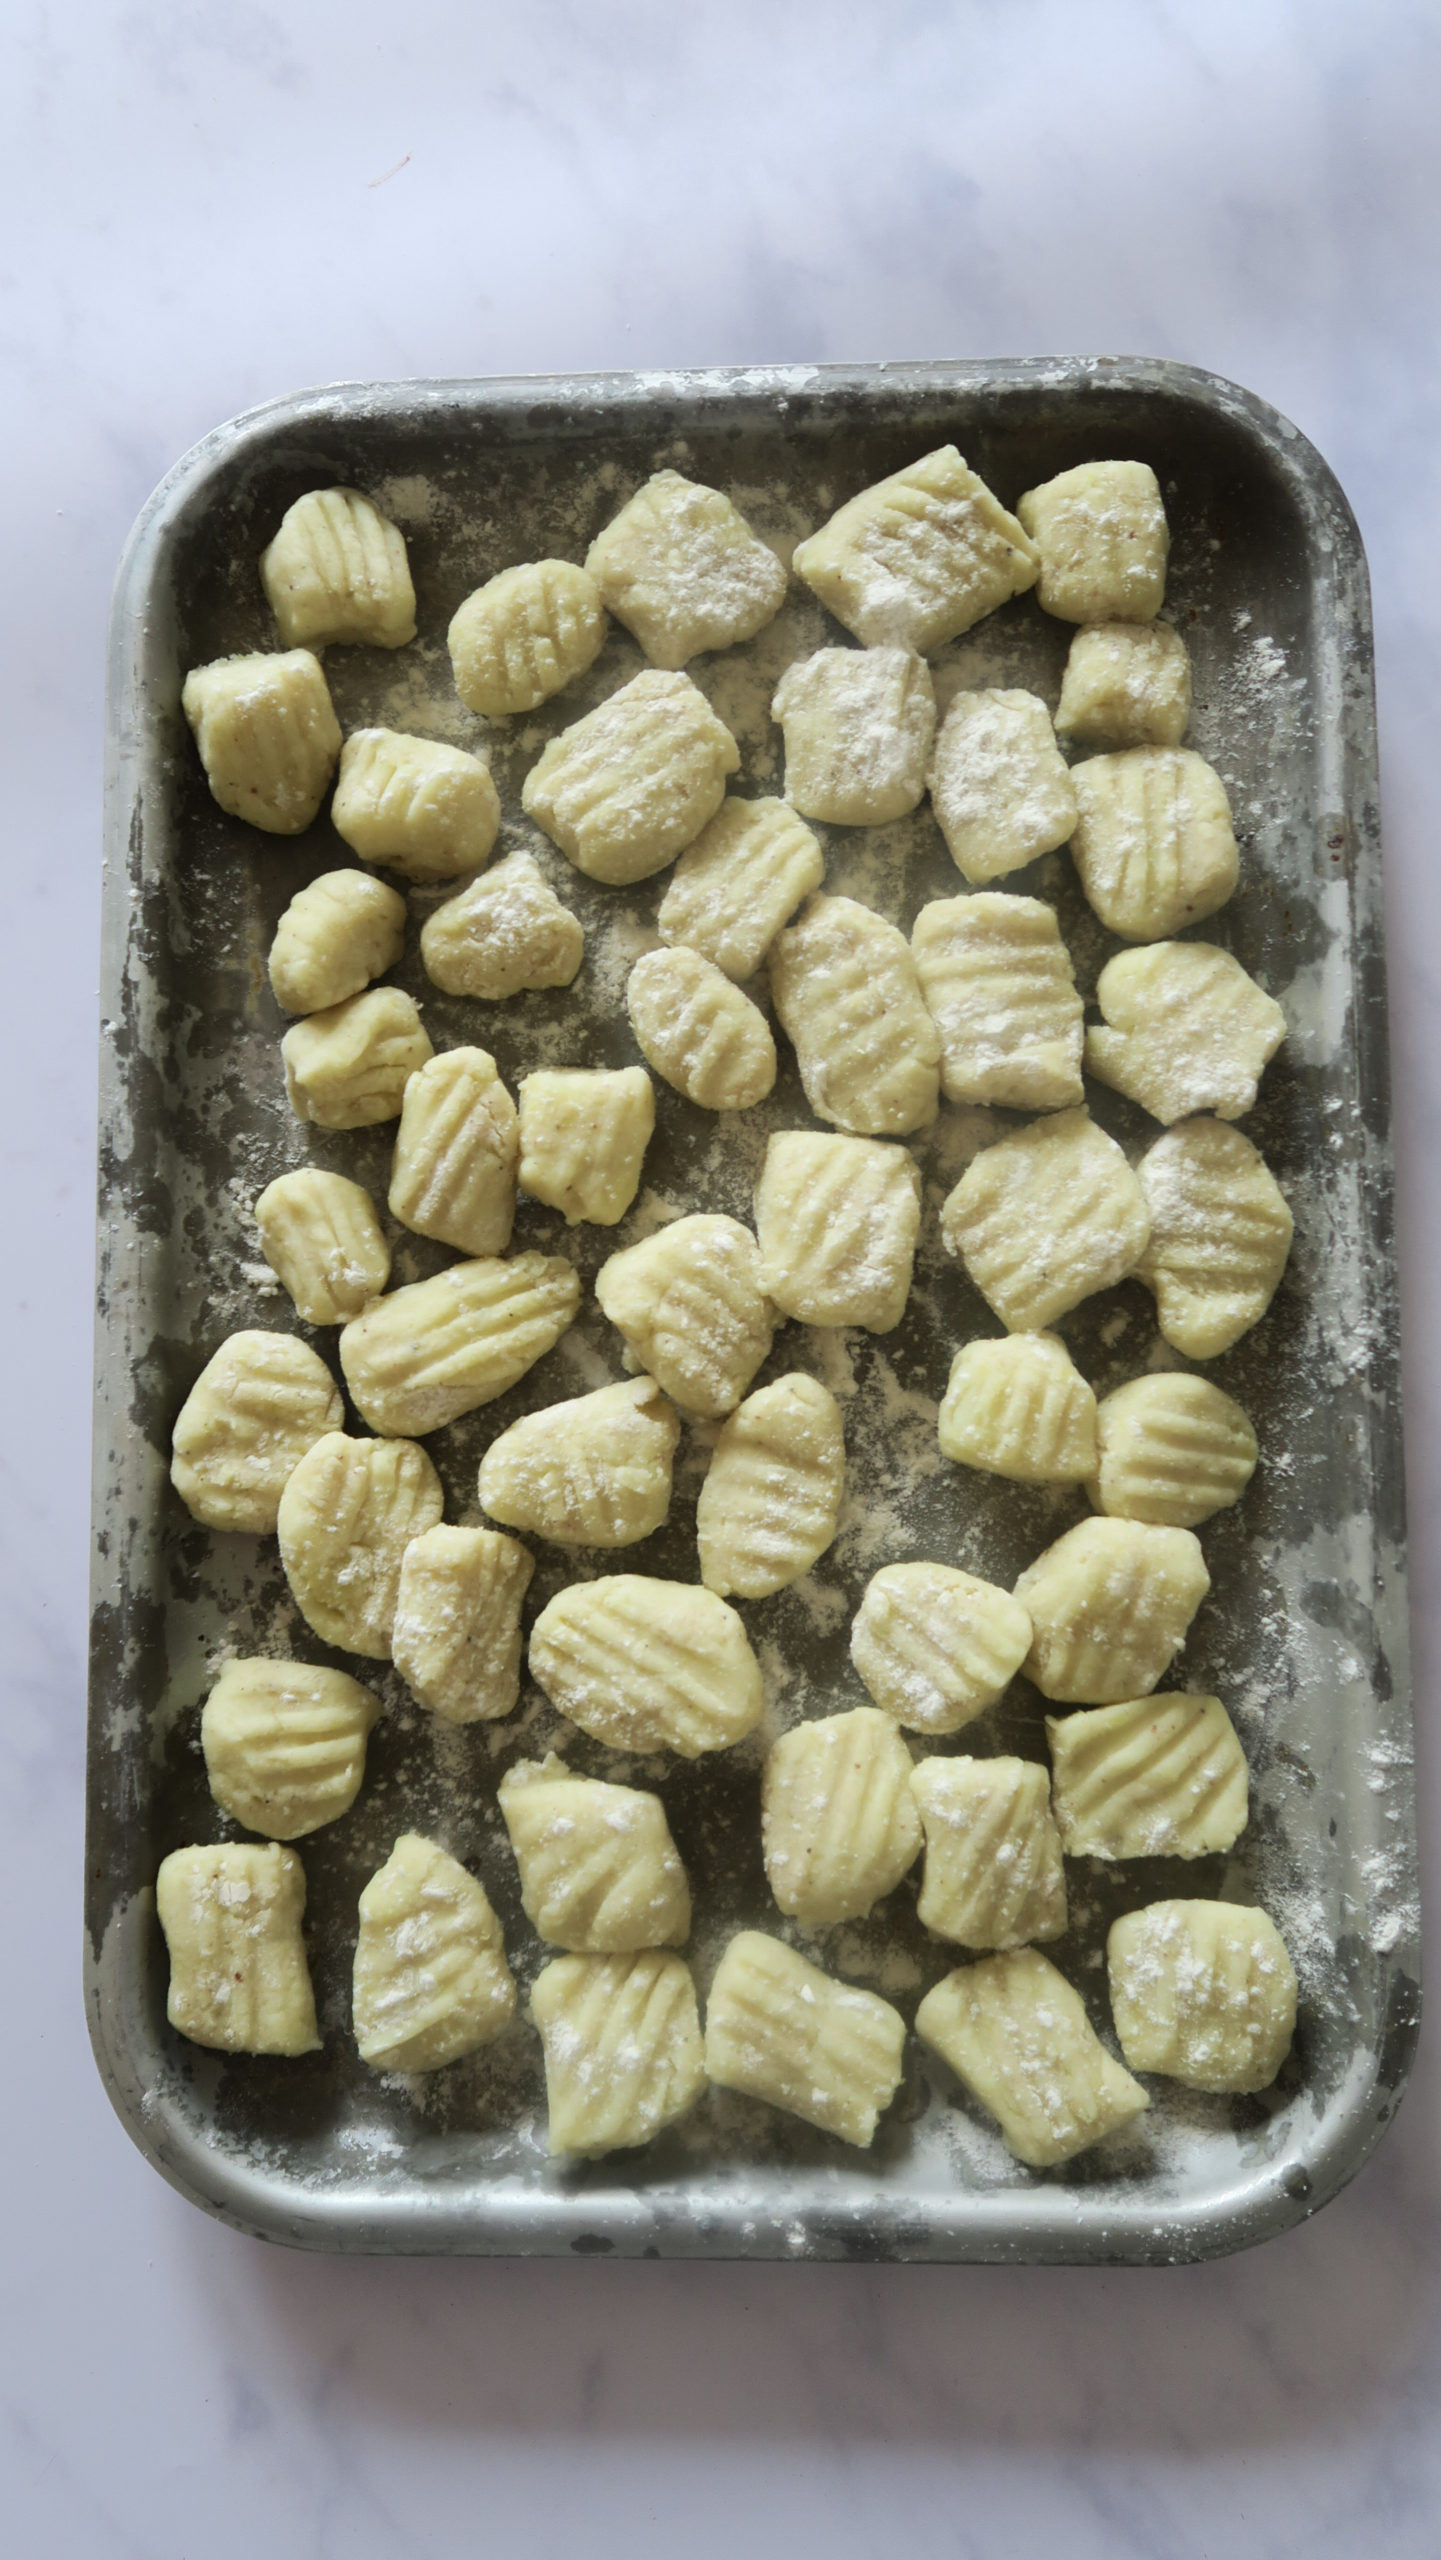 vertical image of pre-cooked gnocchi on a tray